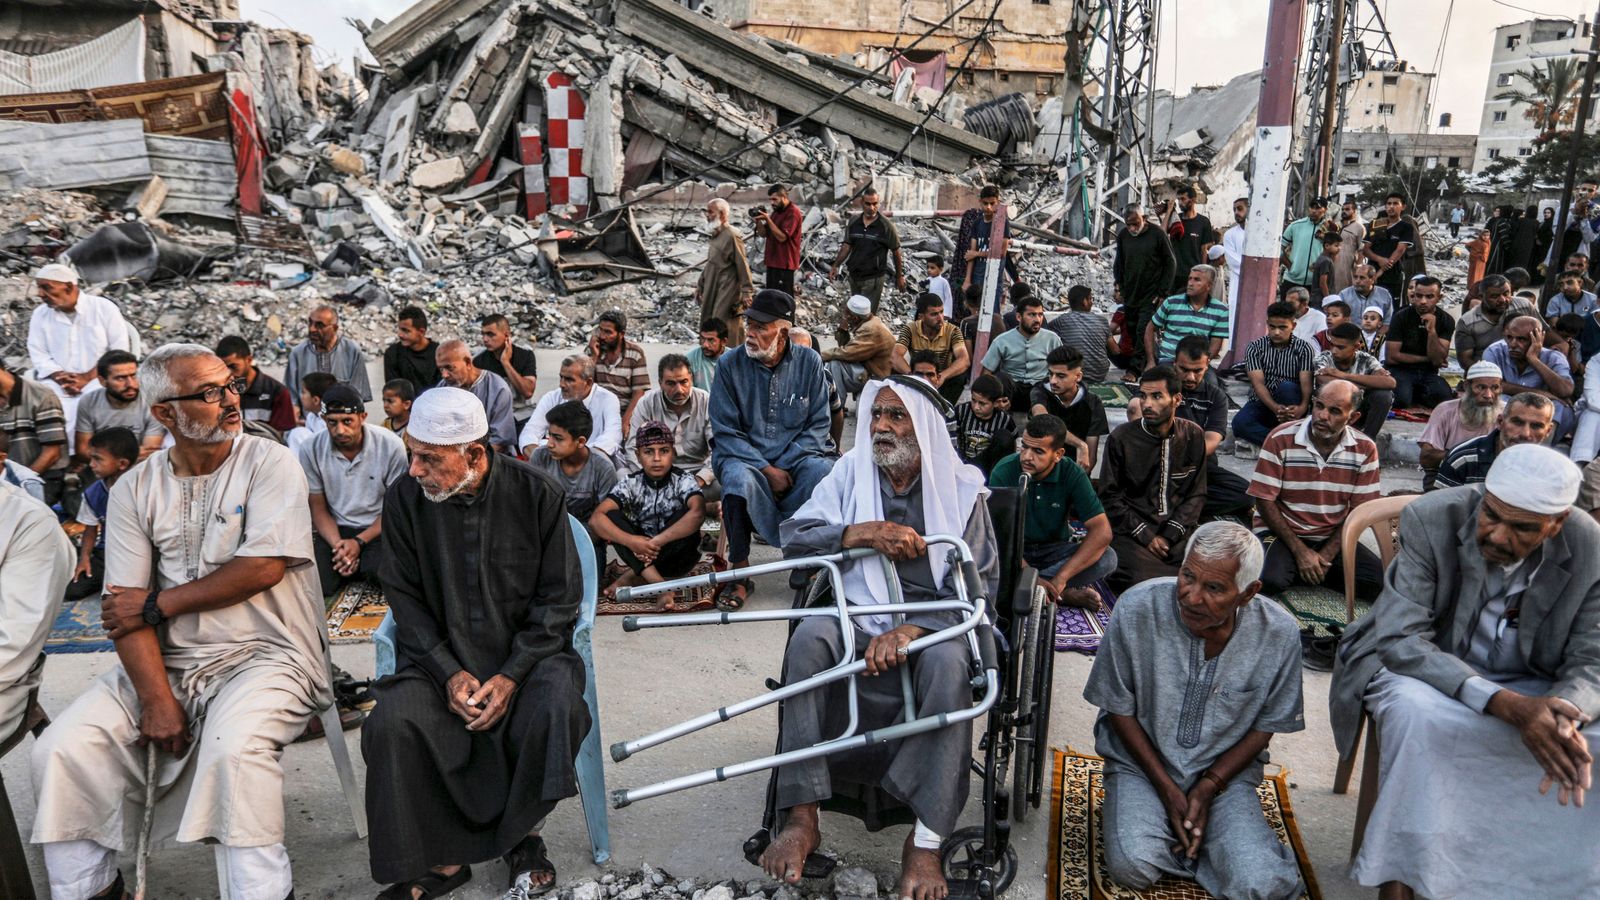 Palestinians gather at ruined mosque for Eid al Adha prayers - as Muslims celebrate around the world